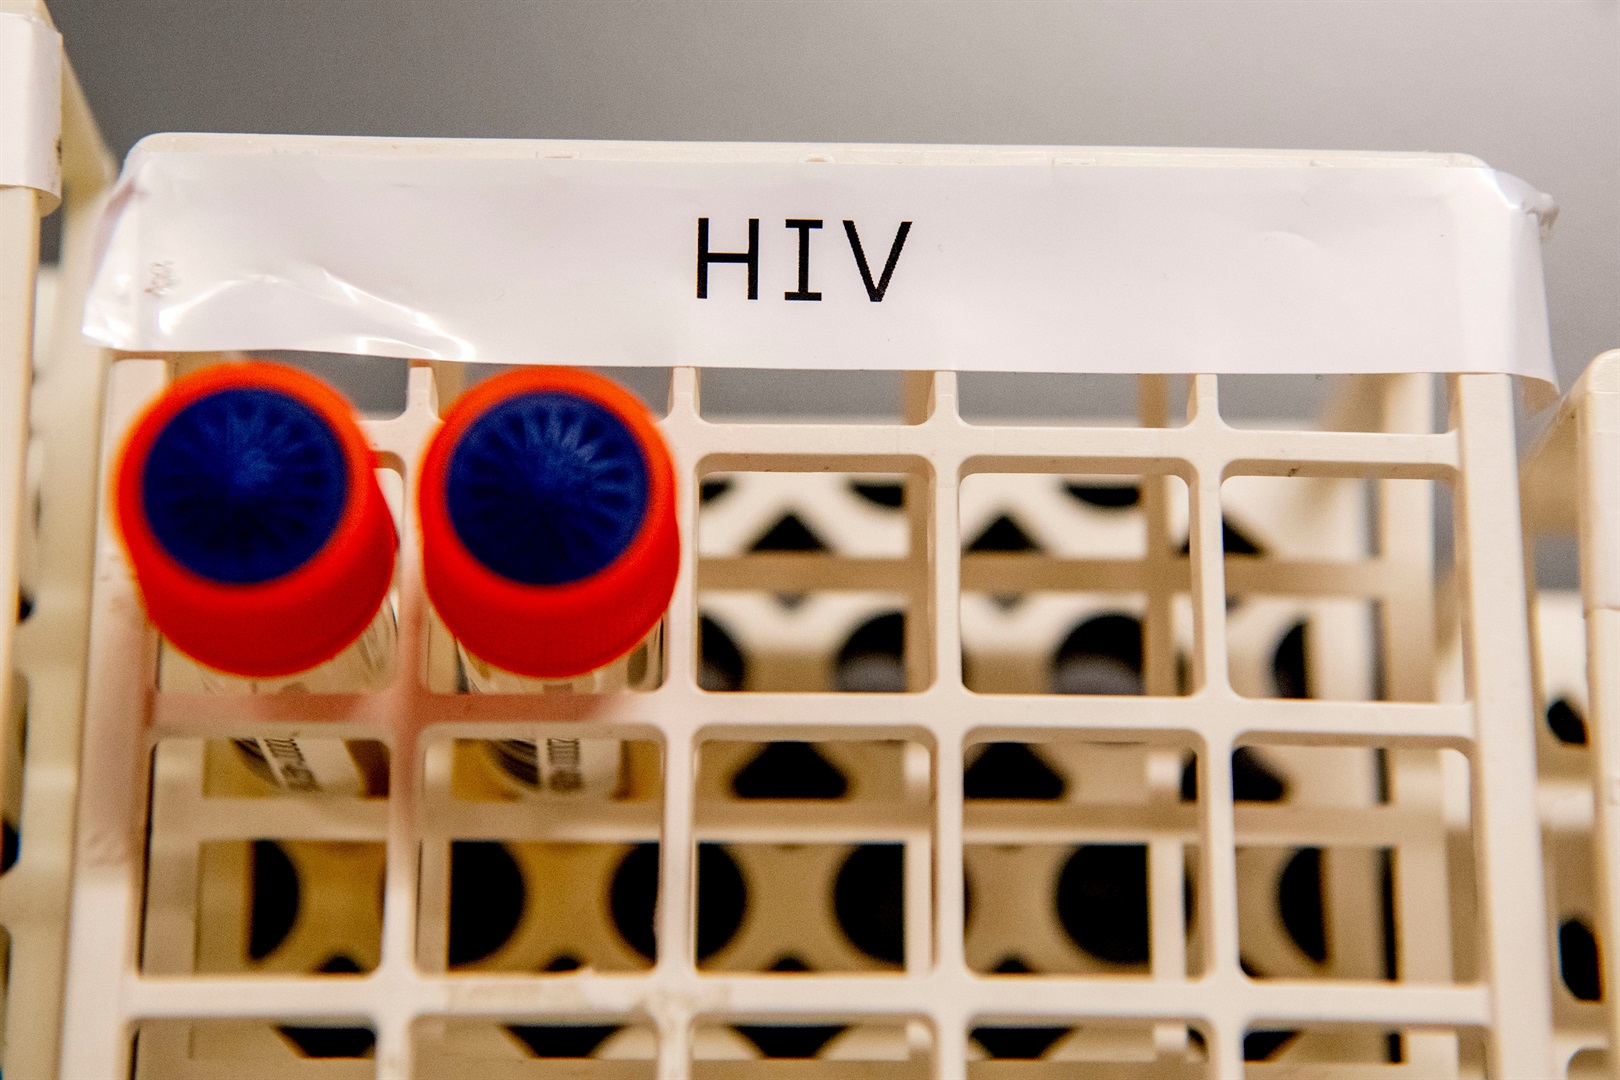 Blood samples from patients with HIV